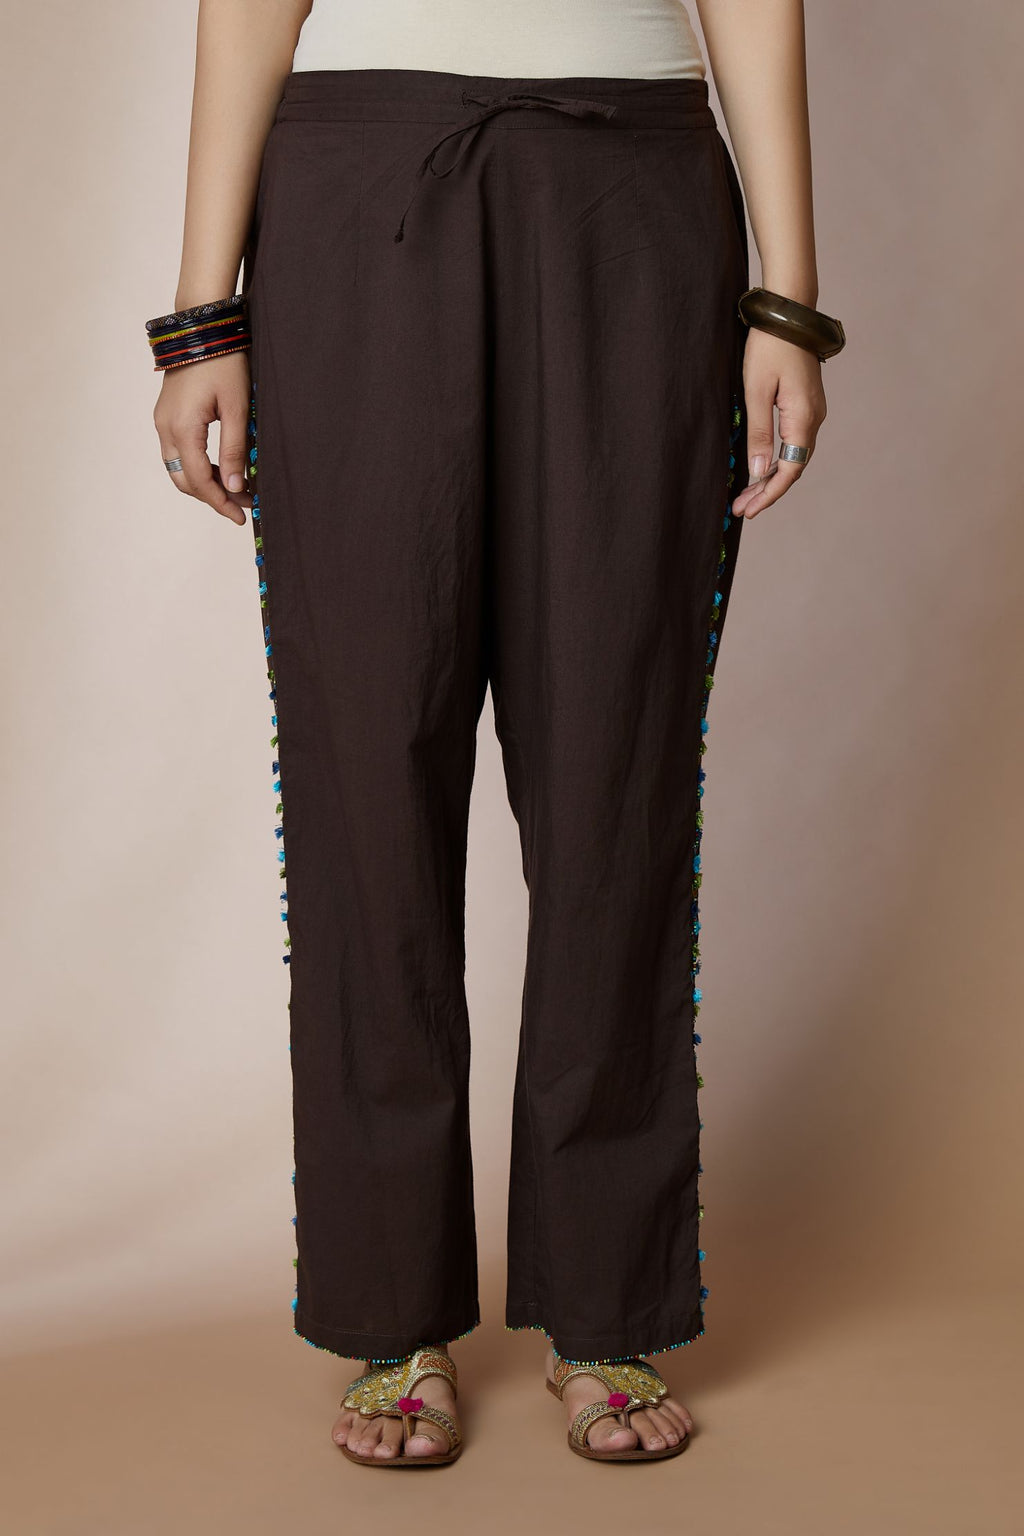 Cocoa brown cotton straight pants with bird and tassel embroidery at sides